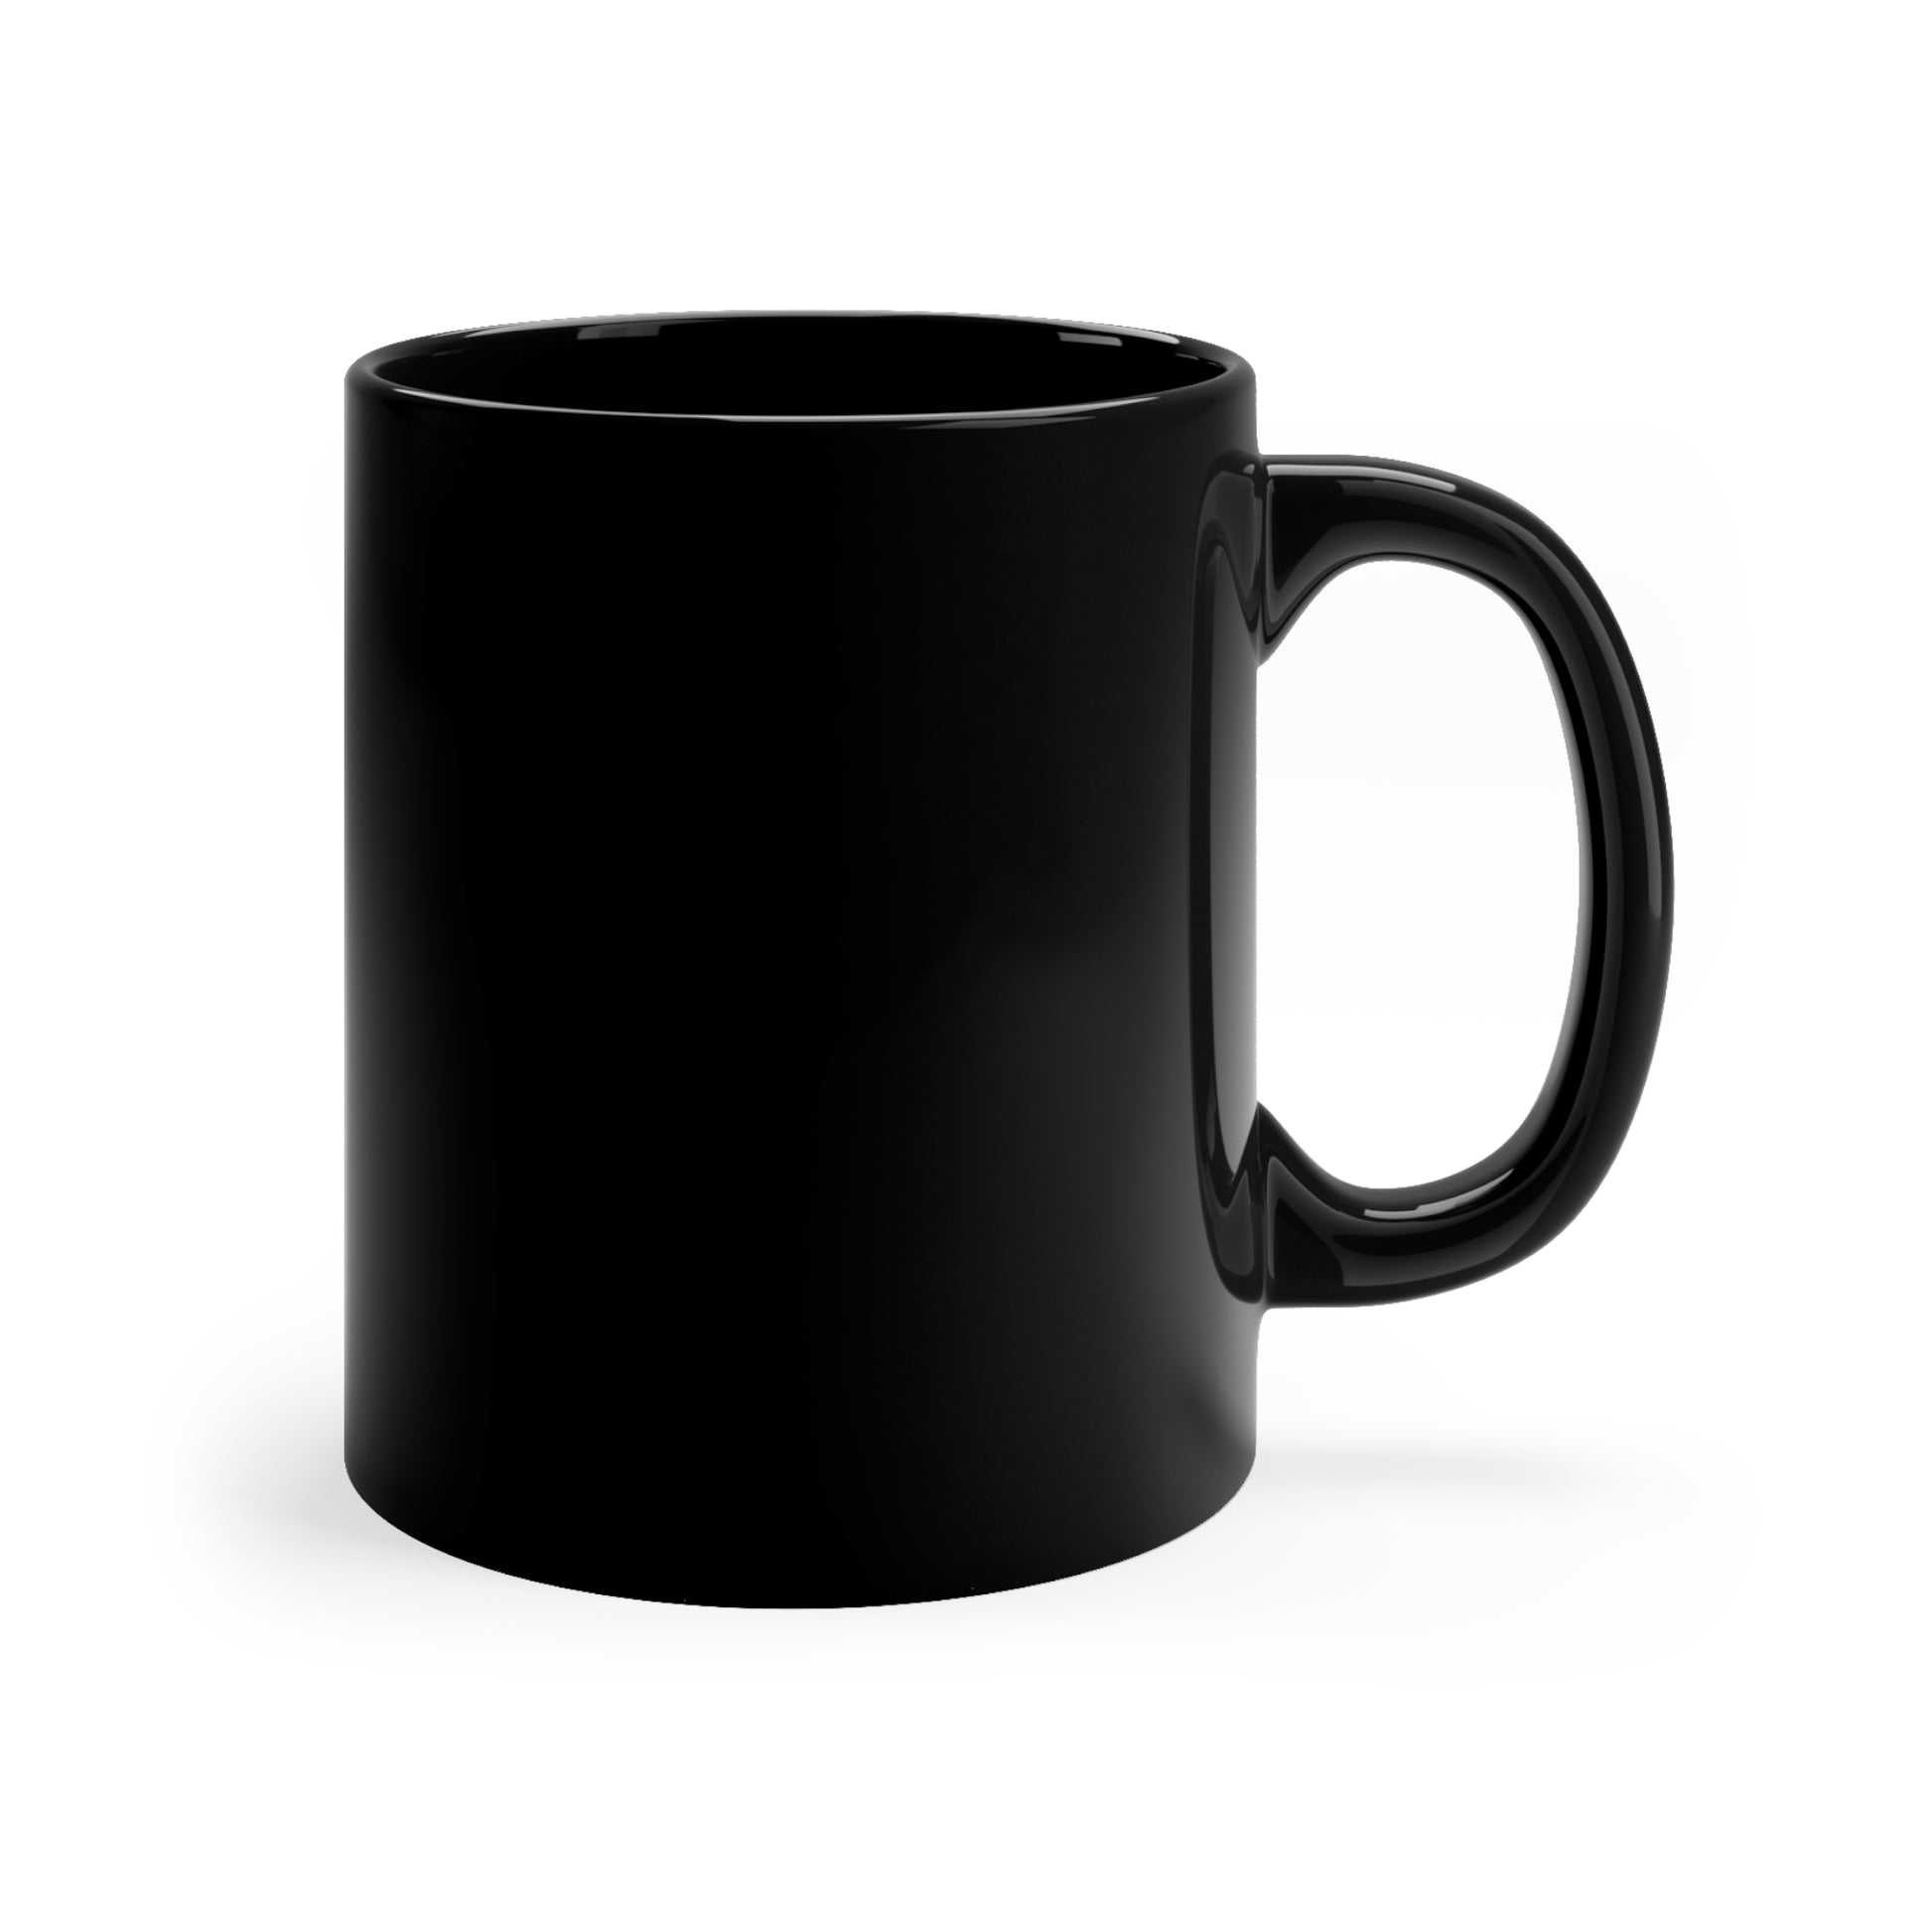 "Love Weed" Coffee Mug - Weave Got Gifts - Unique Gifts You Won’t Find Anywhere Else!